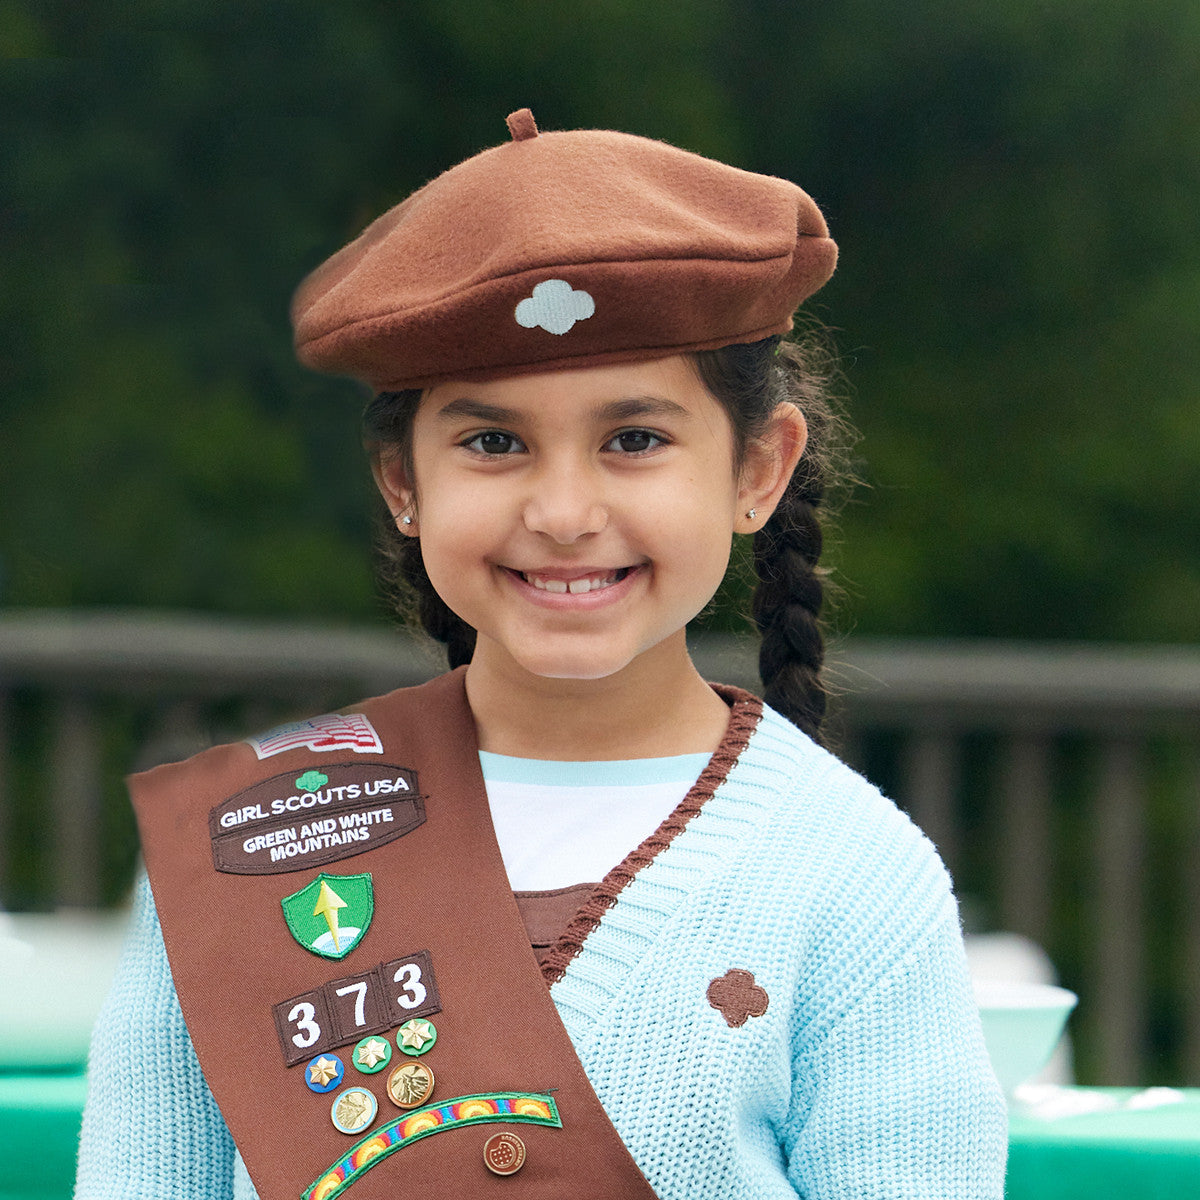 Official Brownie Beret